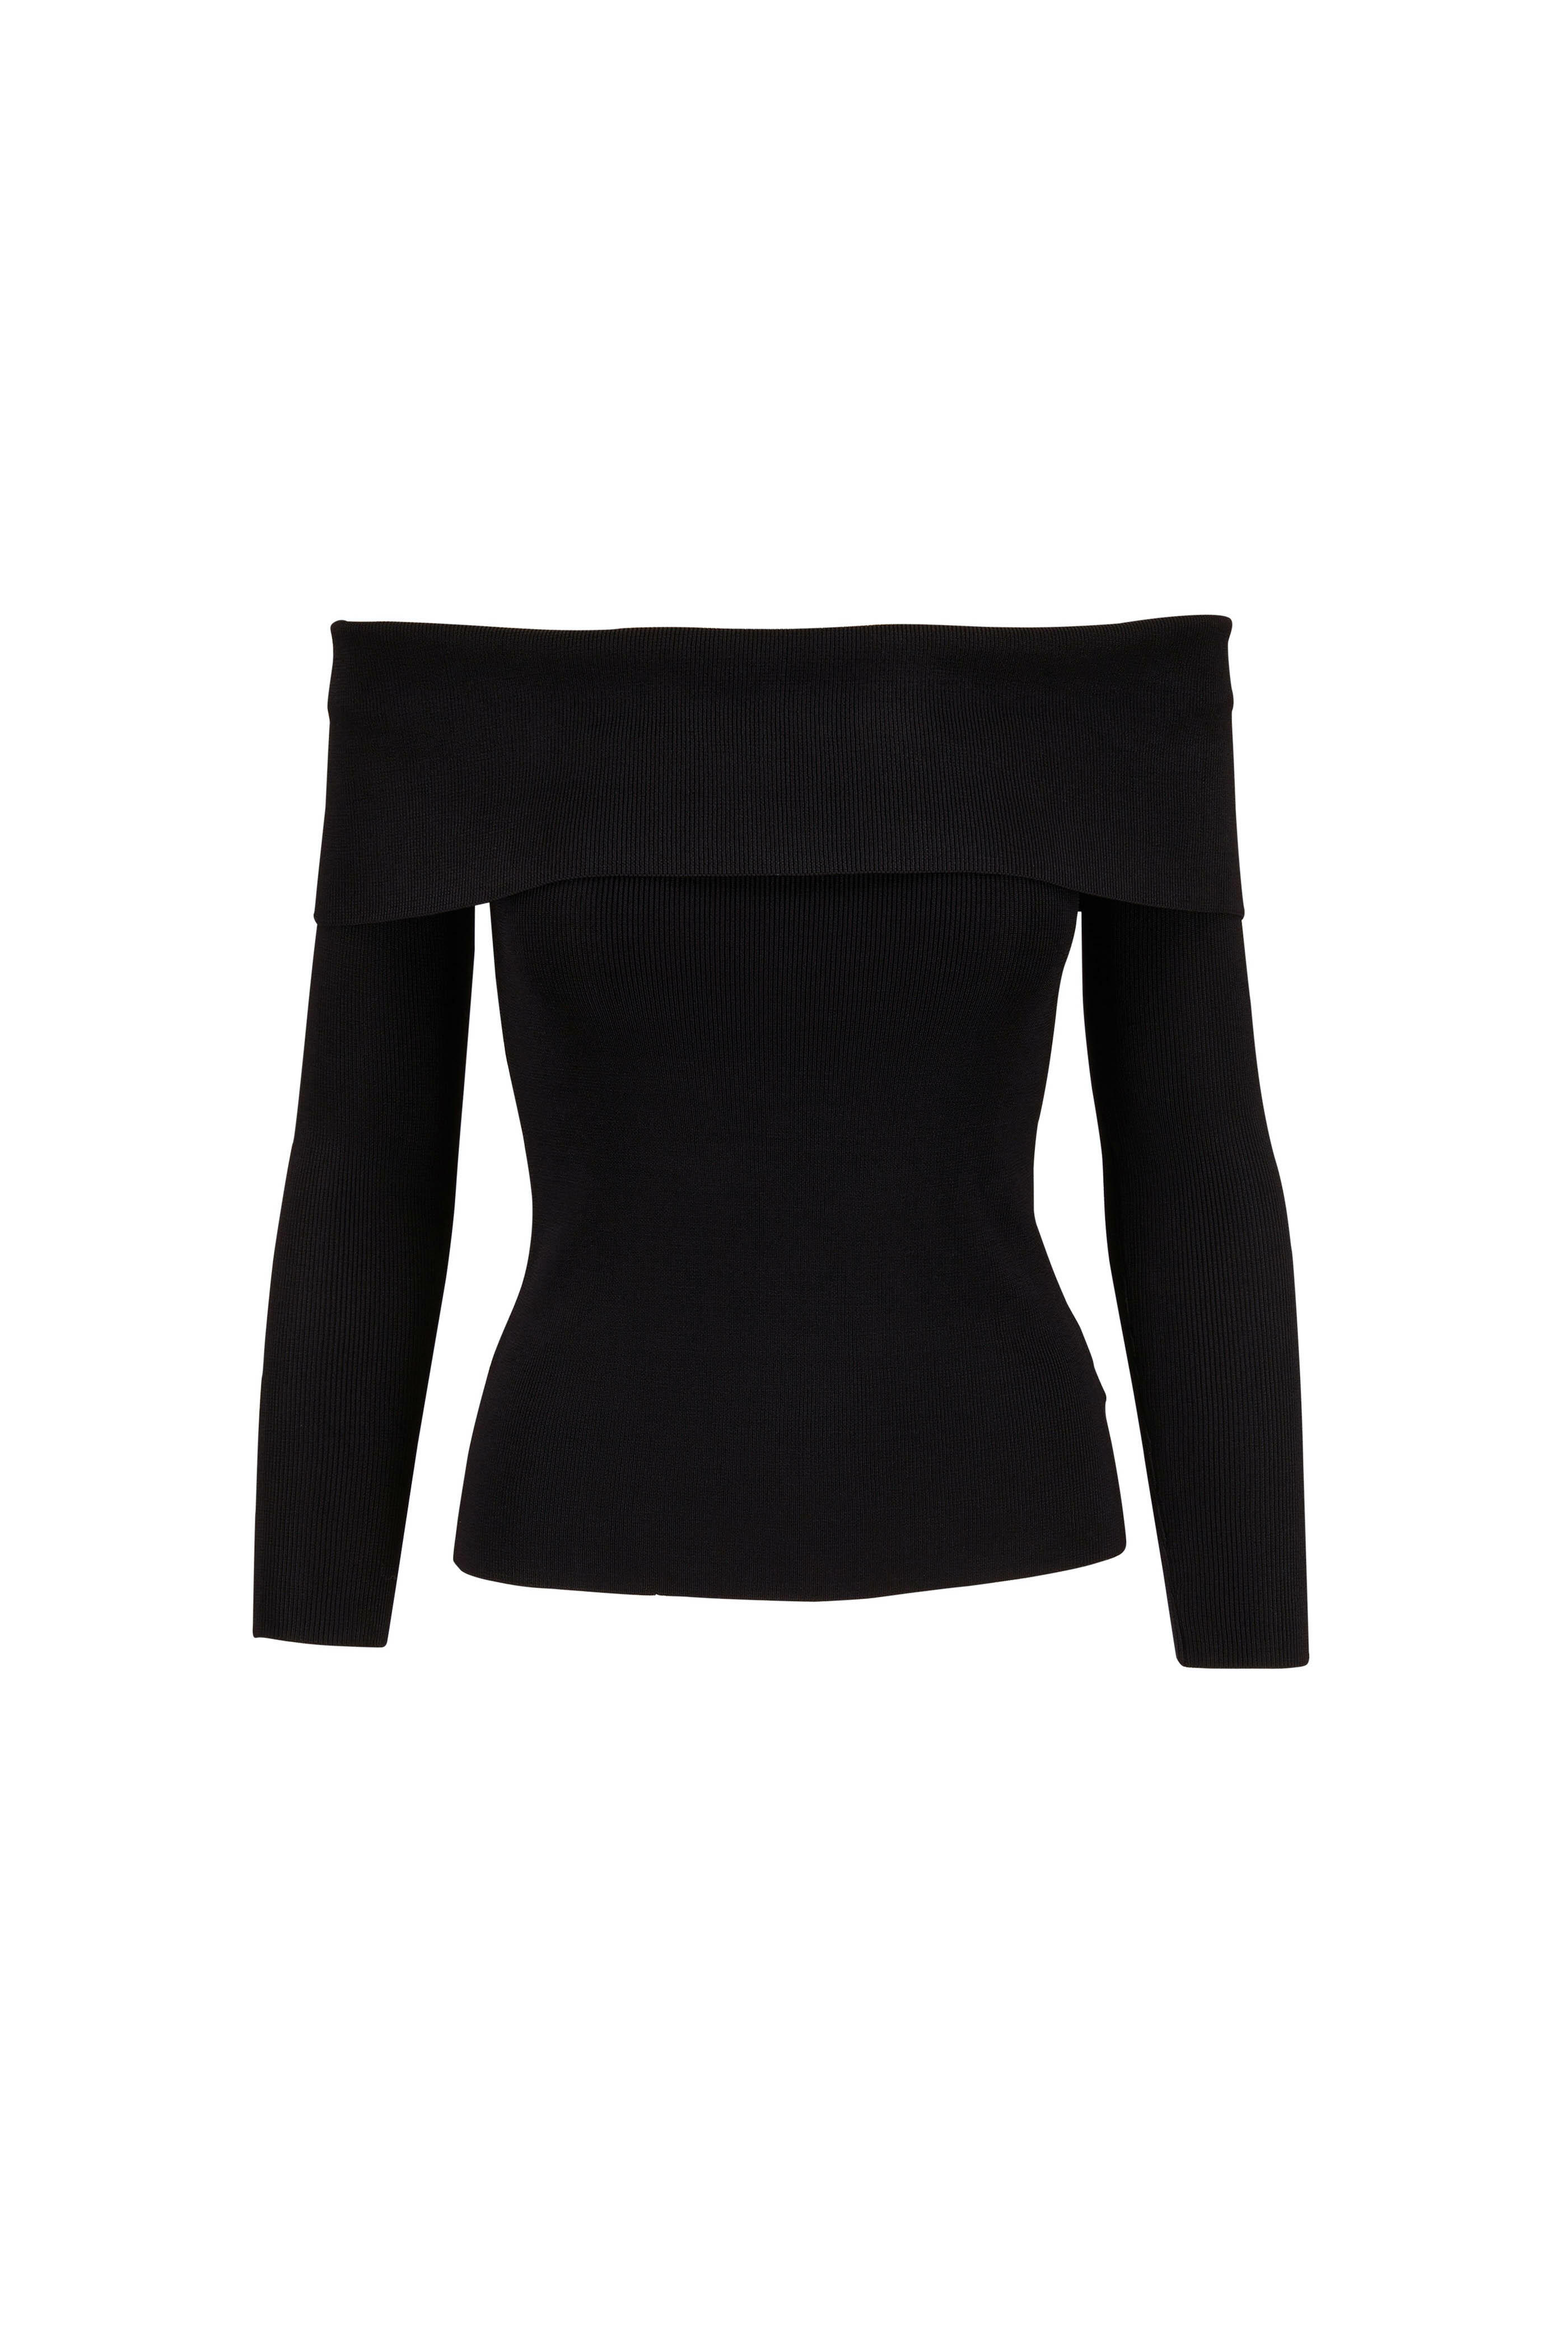 L'Agence - Skye Black Knit Off-The-Shoulder Top | Mitchell Stores